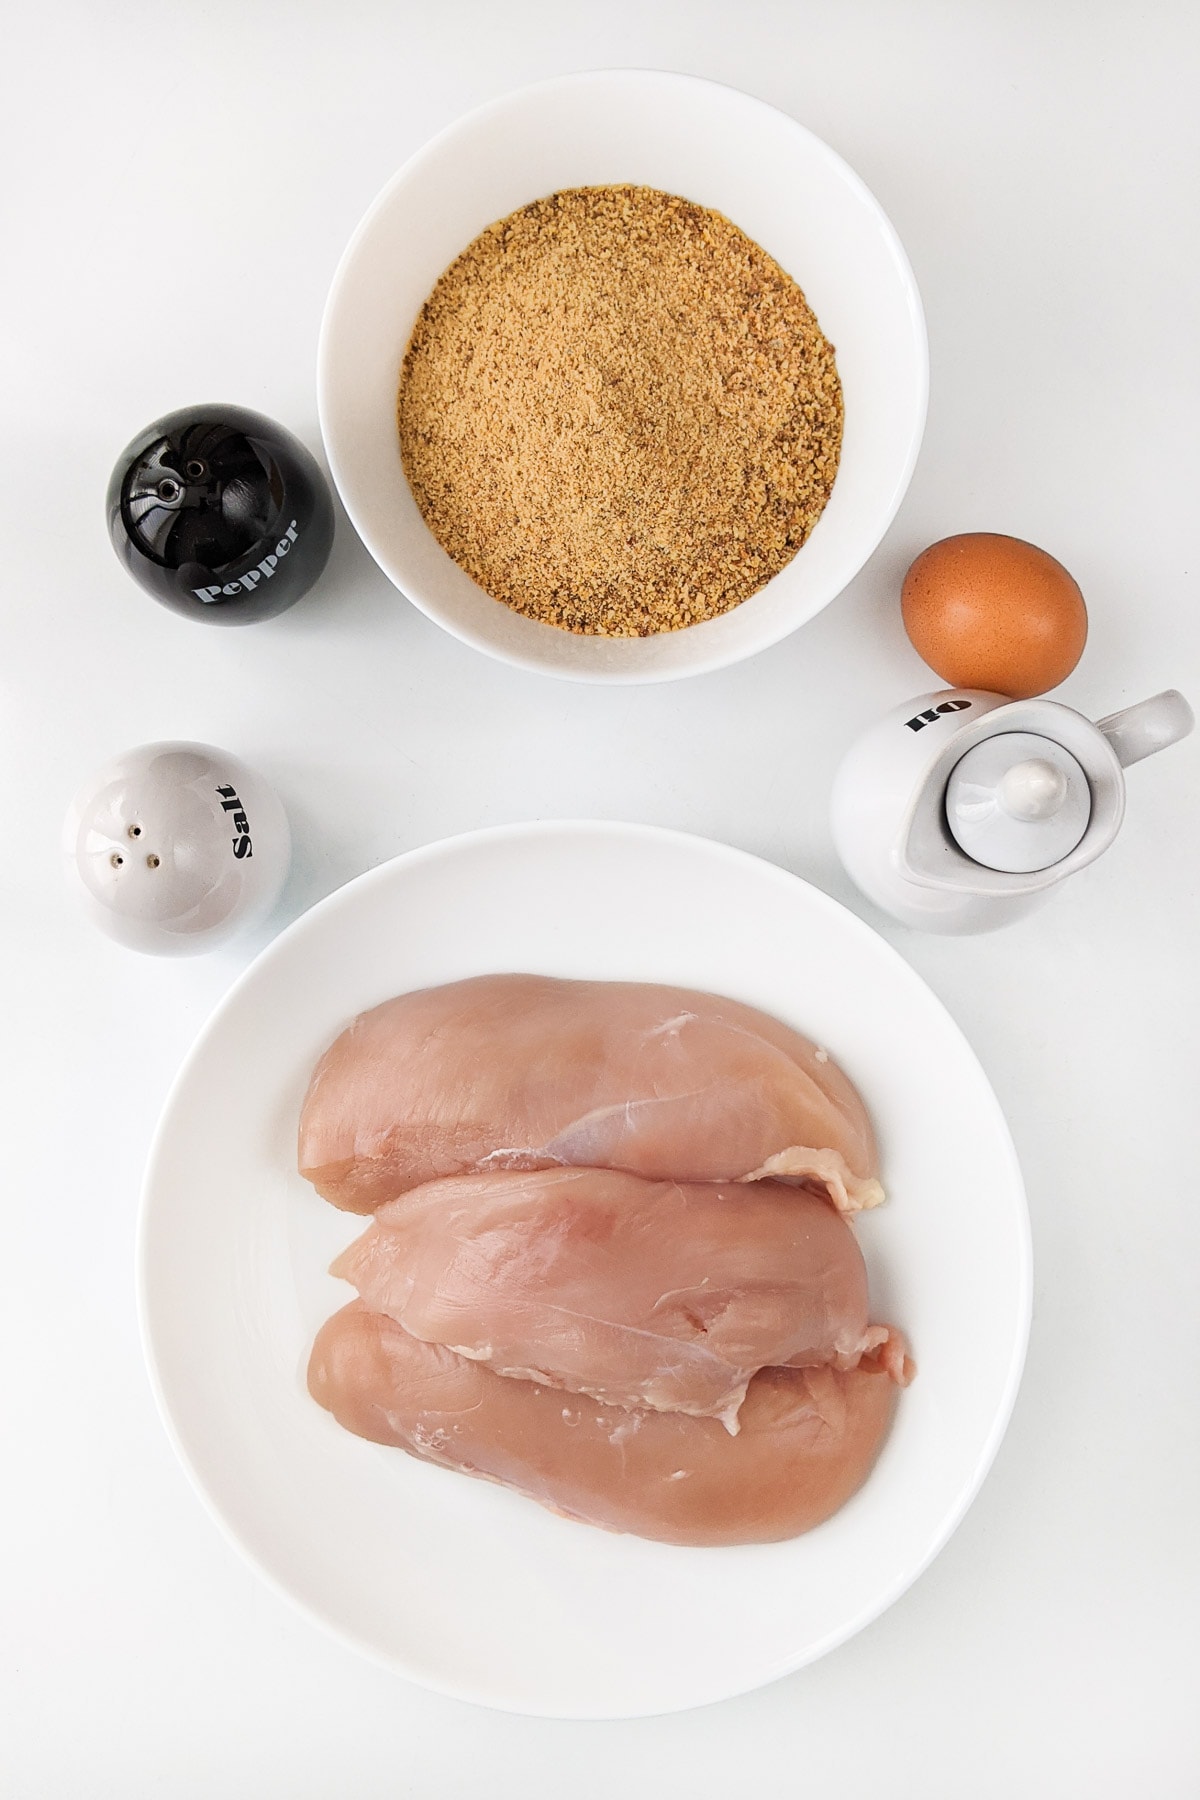 Chicken breasts with bread crumbs and one egg.